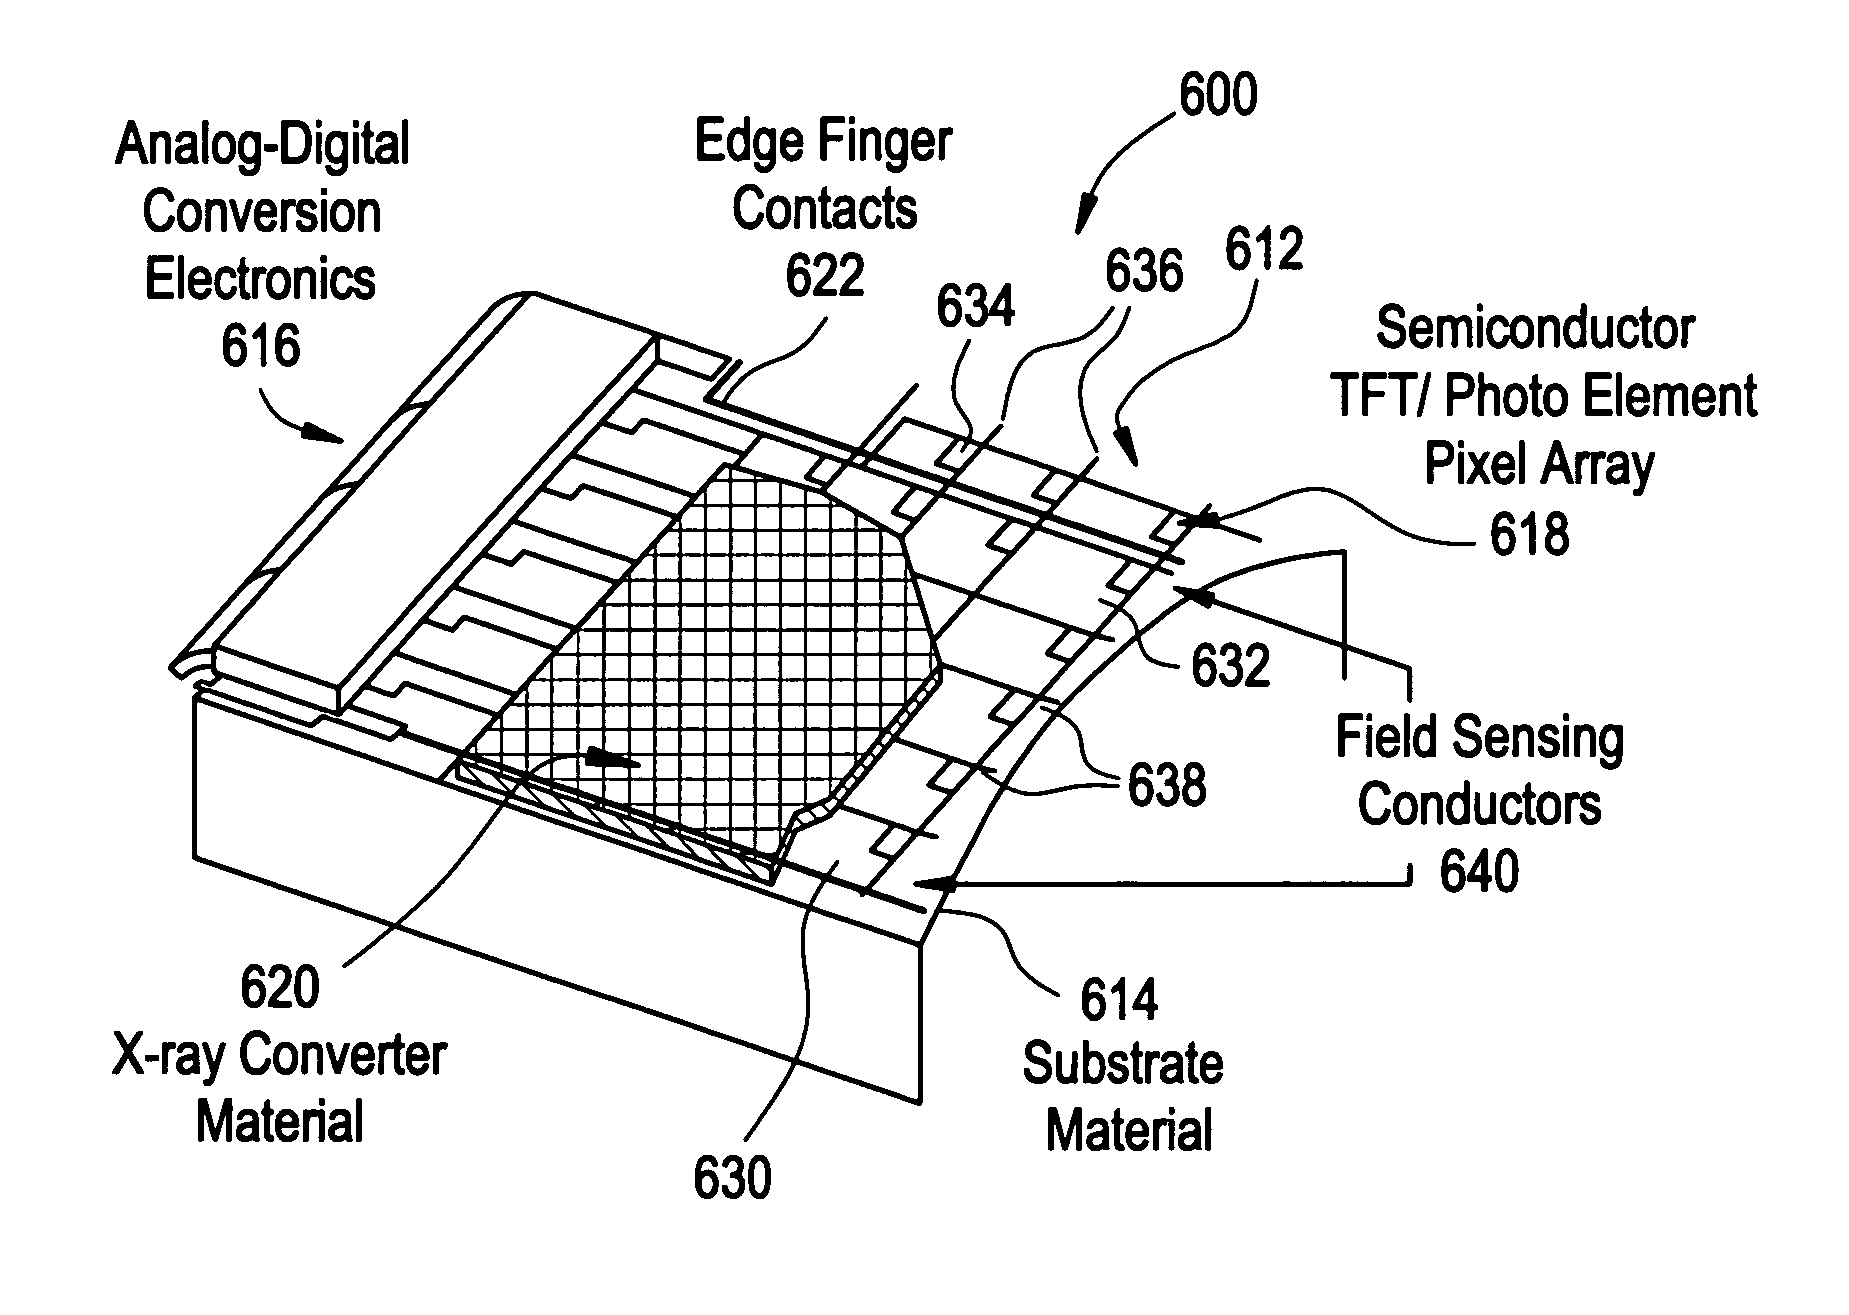 Method and means for reducing electromagnetic noise induced in X-ray detectors